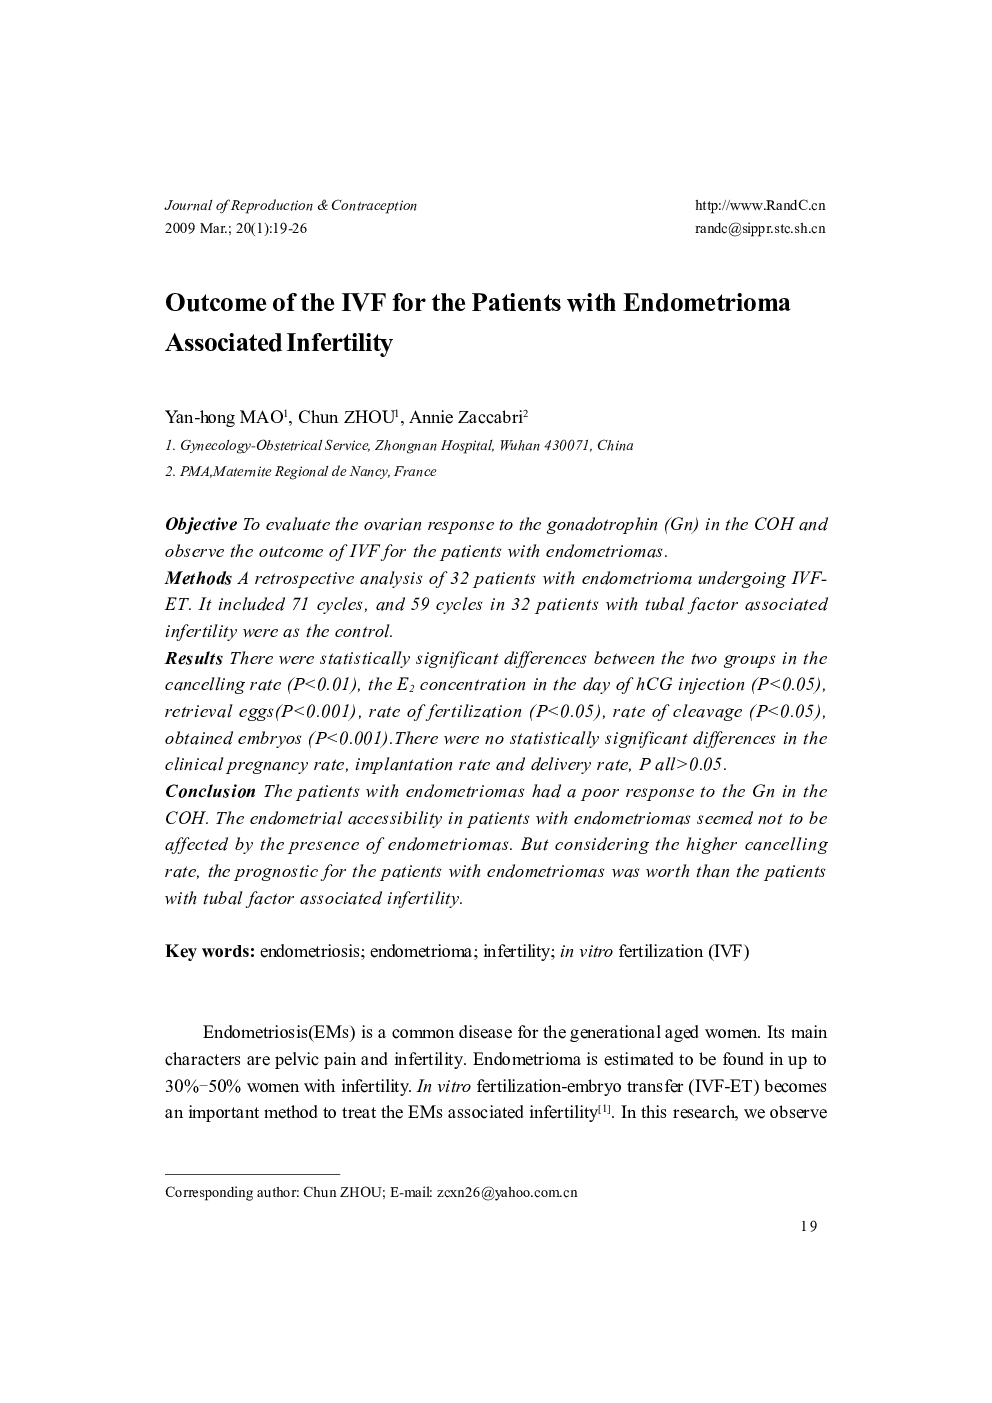 Outcome of the IVF for the Patients with Endometrioma Associated Infertility